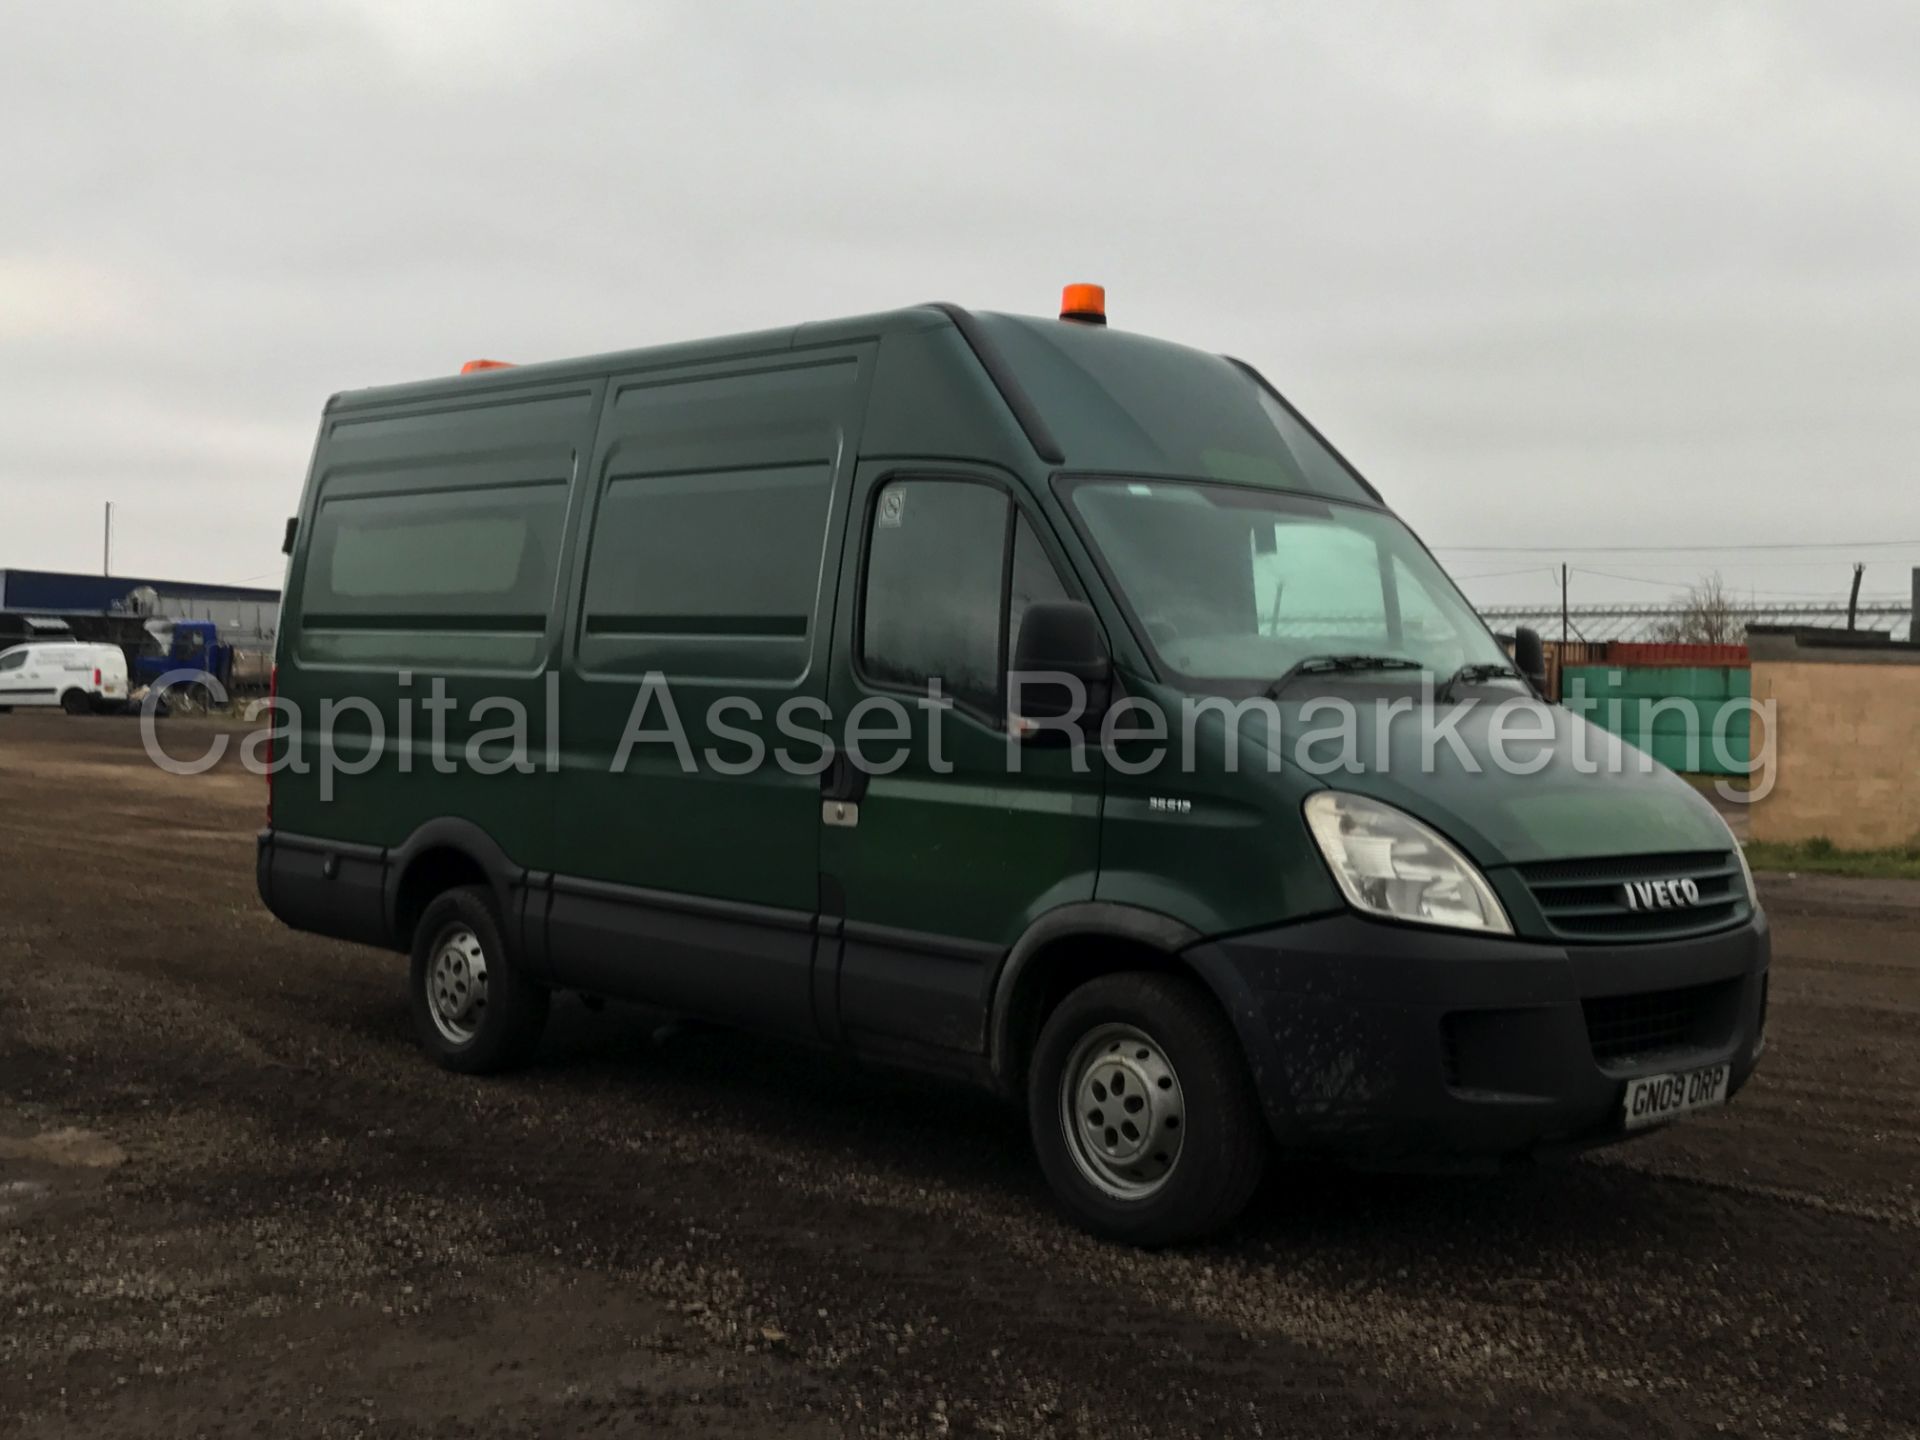 IVECO DAILY 35S12 'MWB HI-ROOF' (2009) '2.3 DIESEL - 120 BHP - 5 SPEED' (1 COMPANY OWNER)